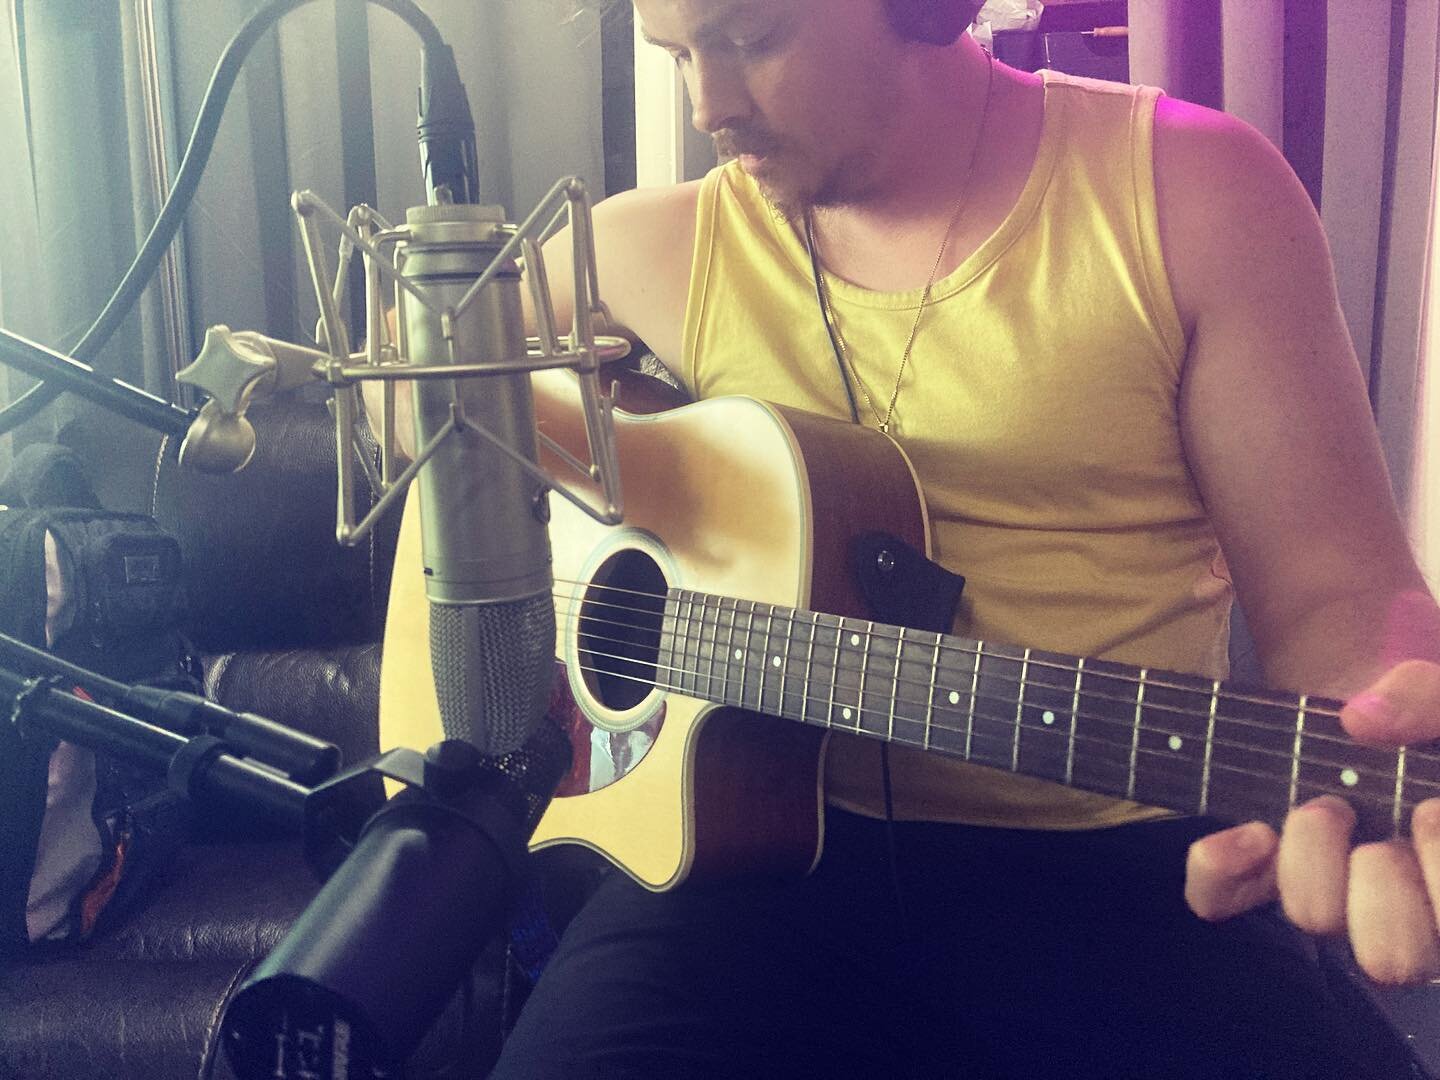 Recording guitars today with @clevelandguy91 mid/side mic technique with SM7B (mid) and @warmaudio WA-87 (side)